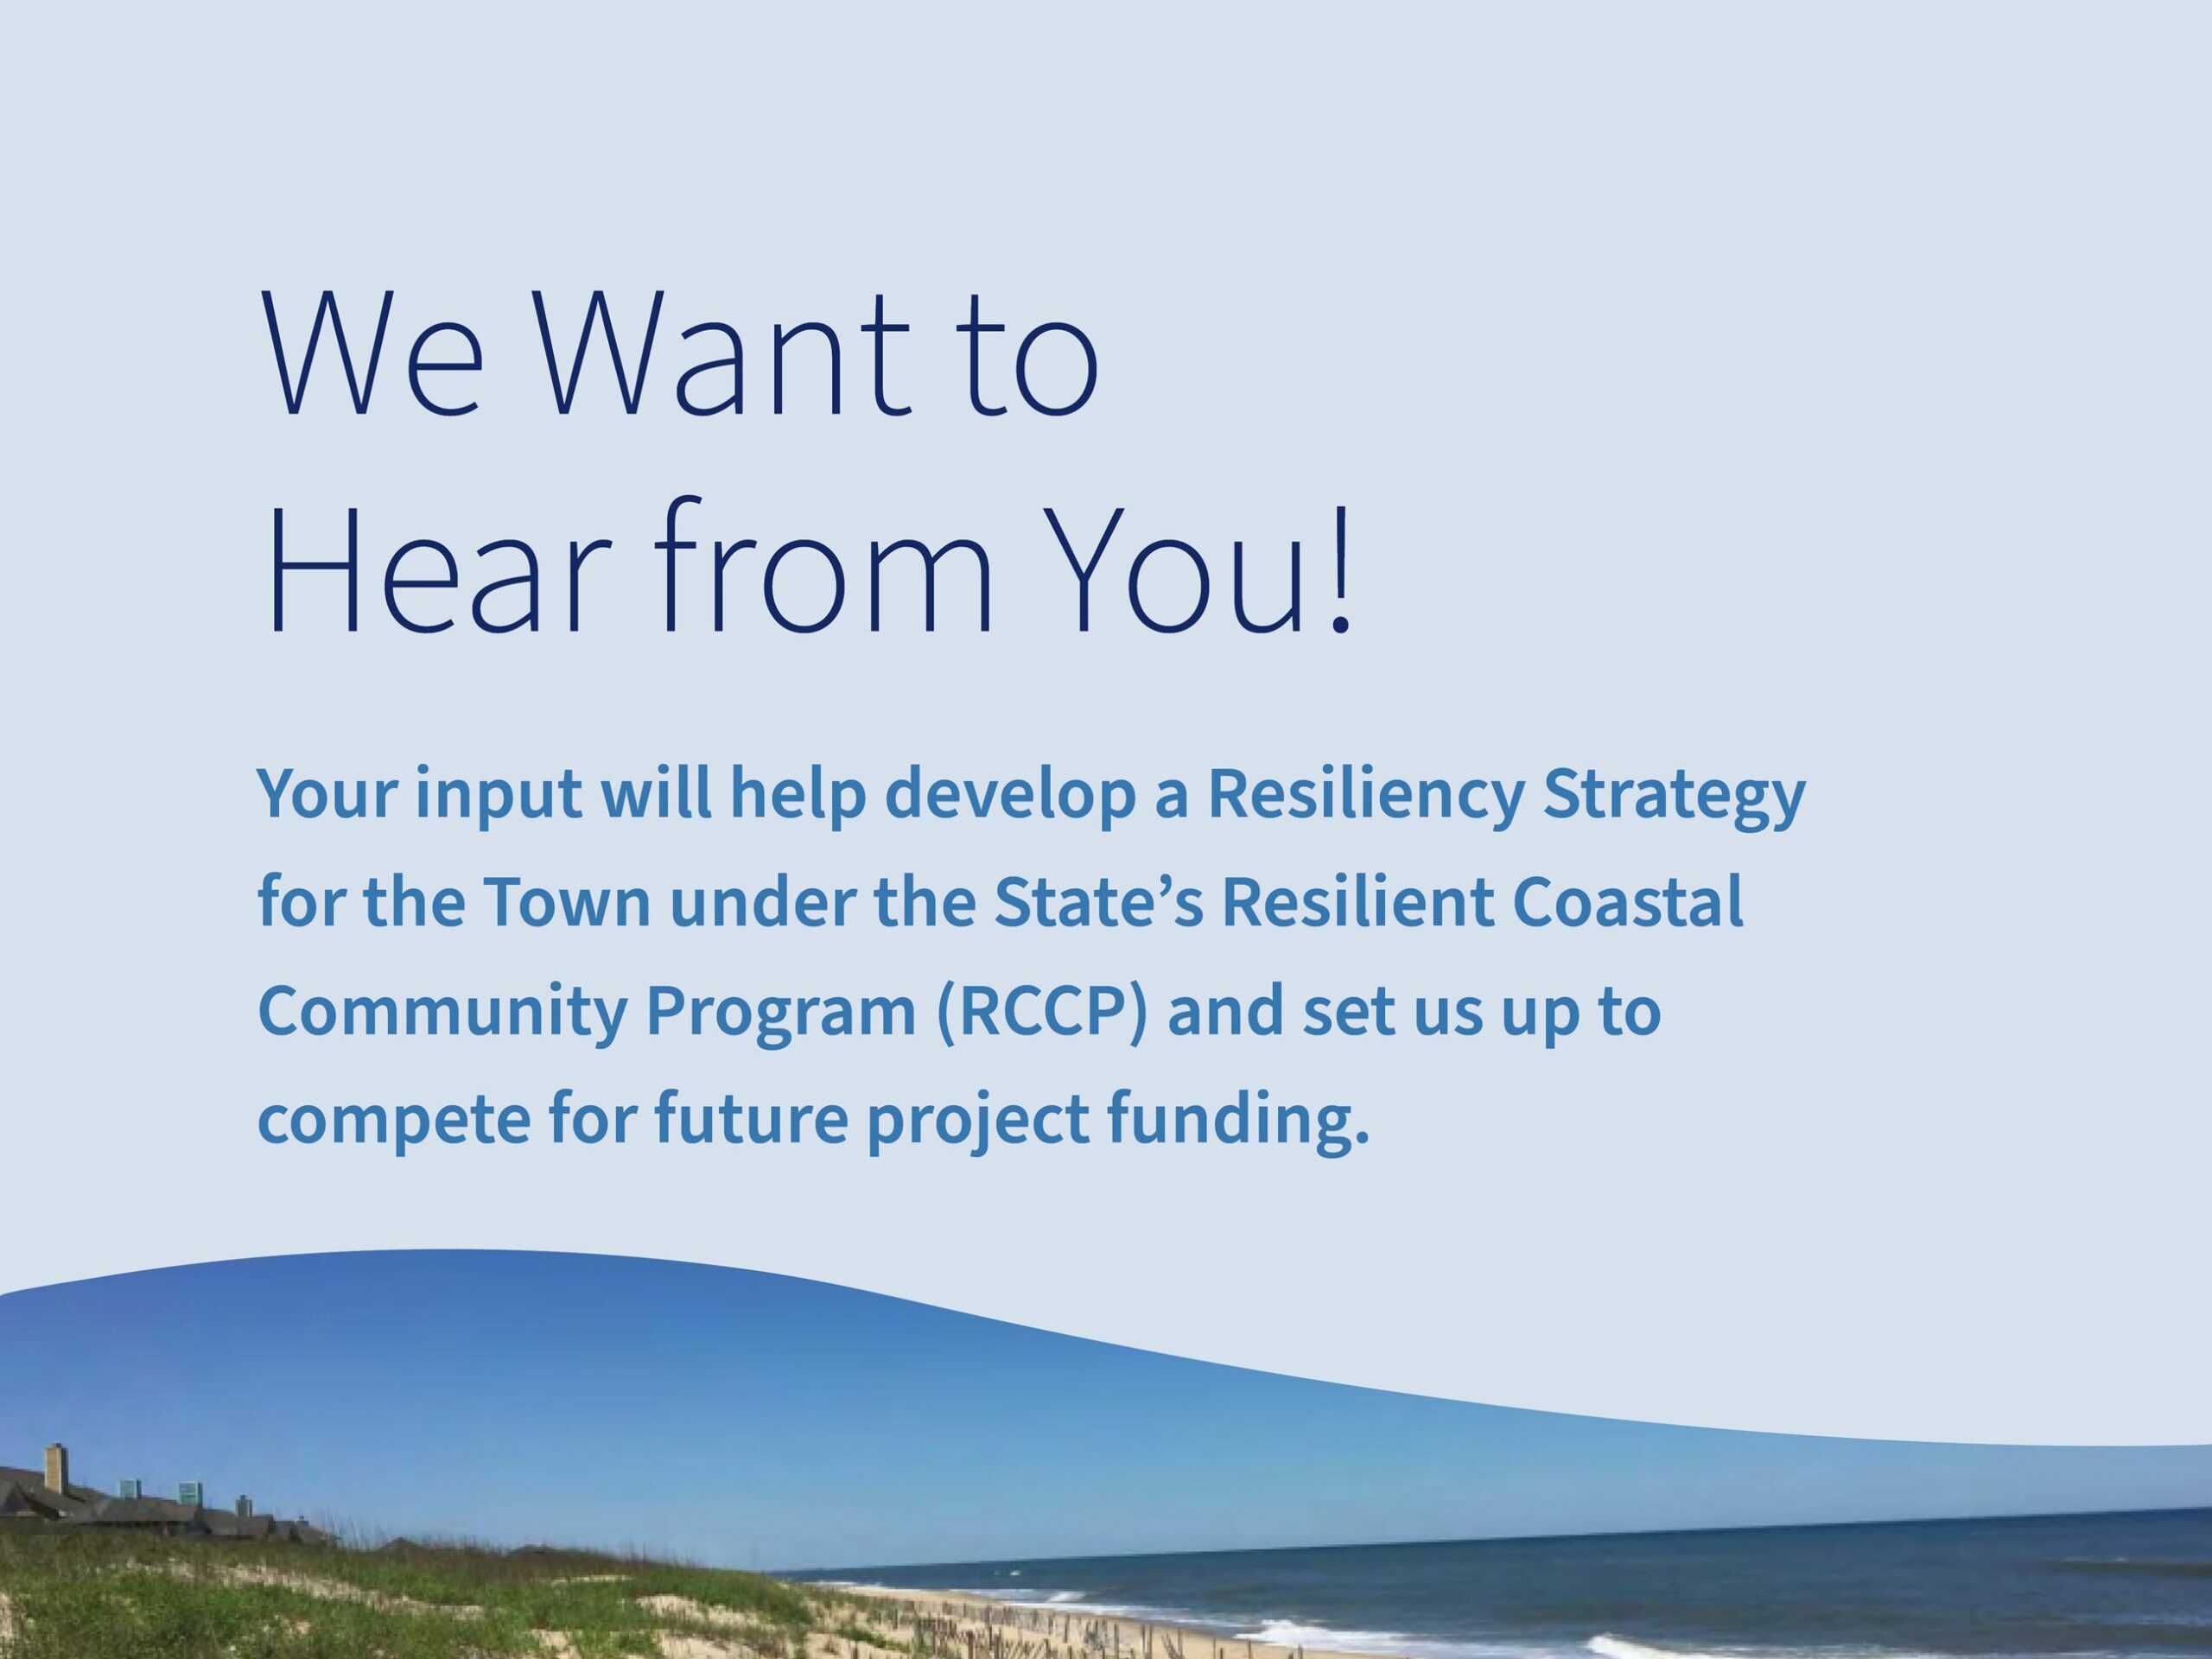 The Town of Nags Head seeks public feedback for Resilience Strategy - OBX Today